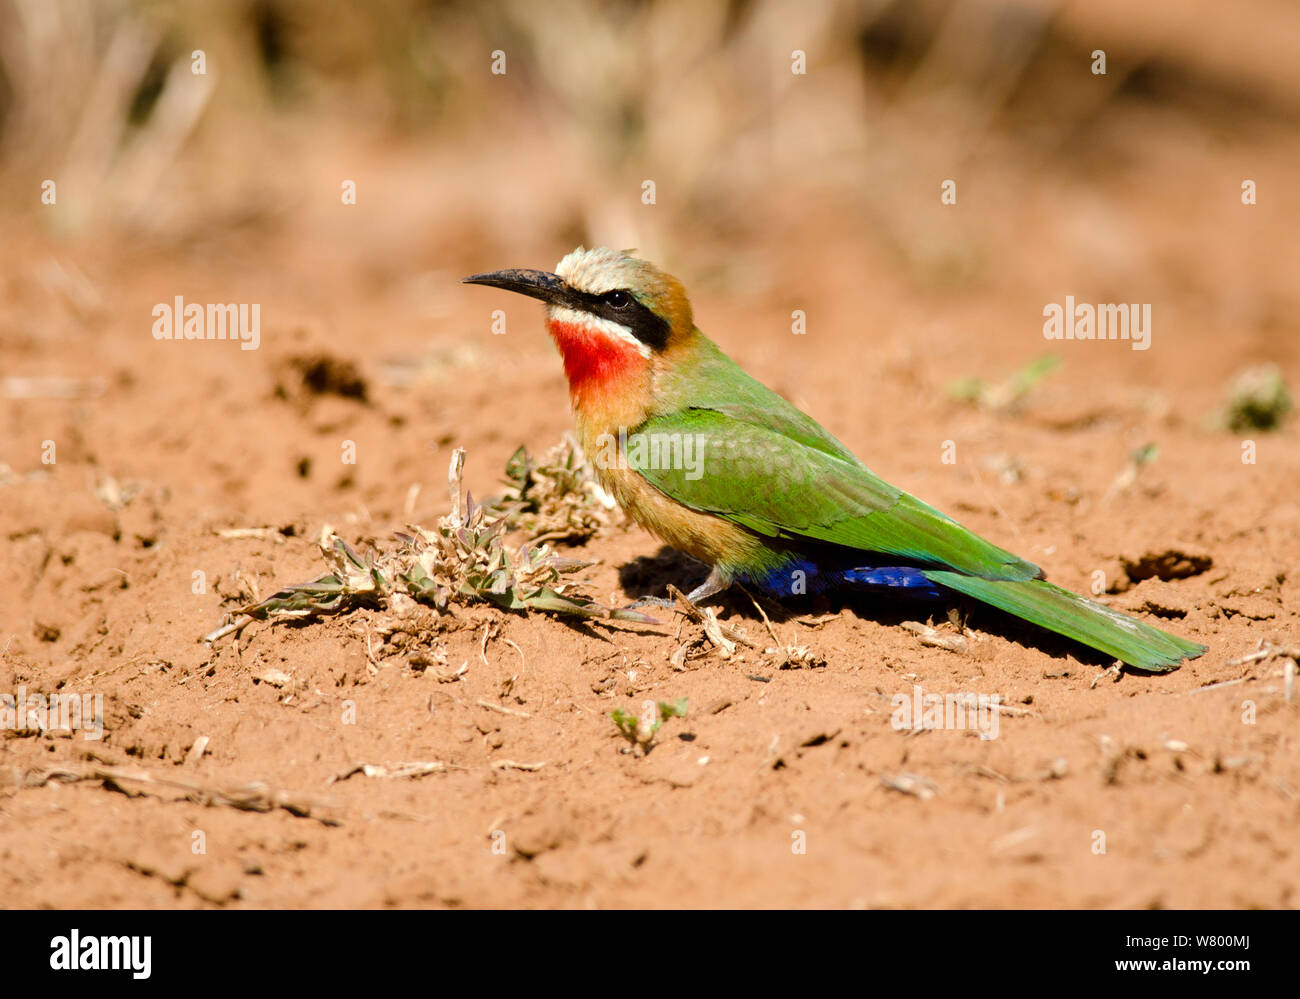 White-fronted bee-eater (Merops bullockoides) on ground, Kruger National Park, South Africa, July. Stock Photo